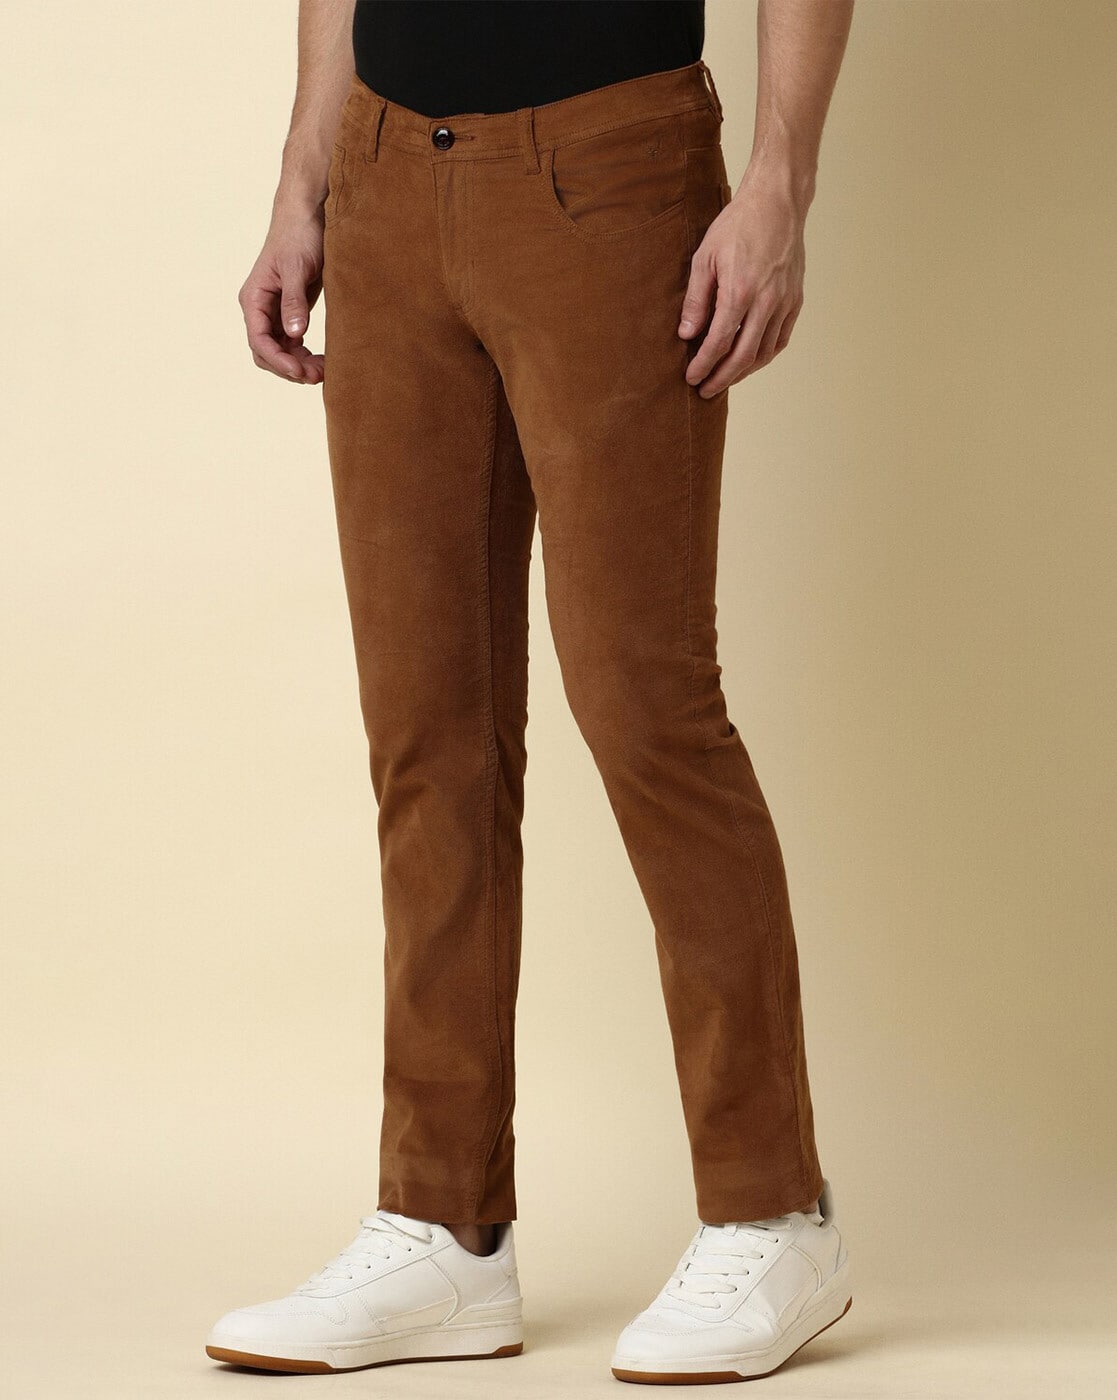 Buy Allen Solly Junior Boys Olive Slim Fit Solid Trousers online